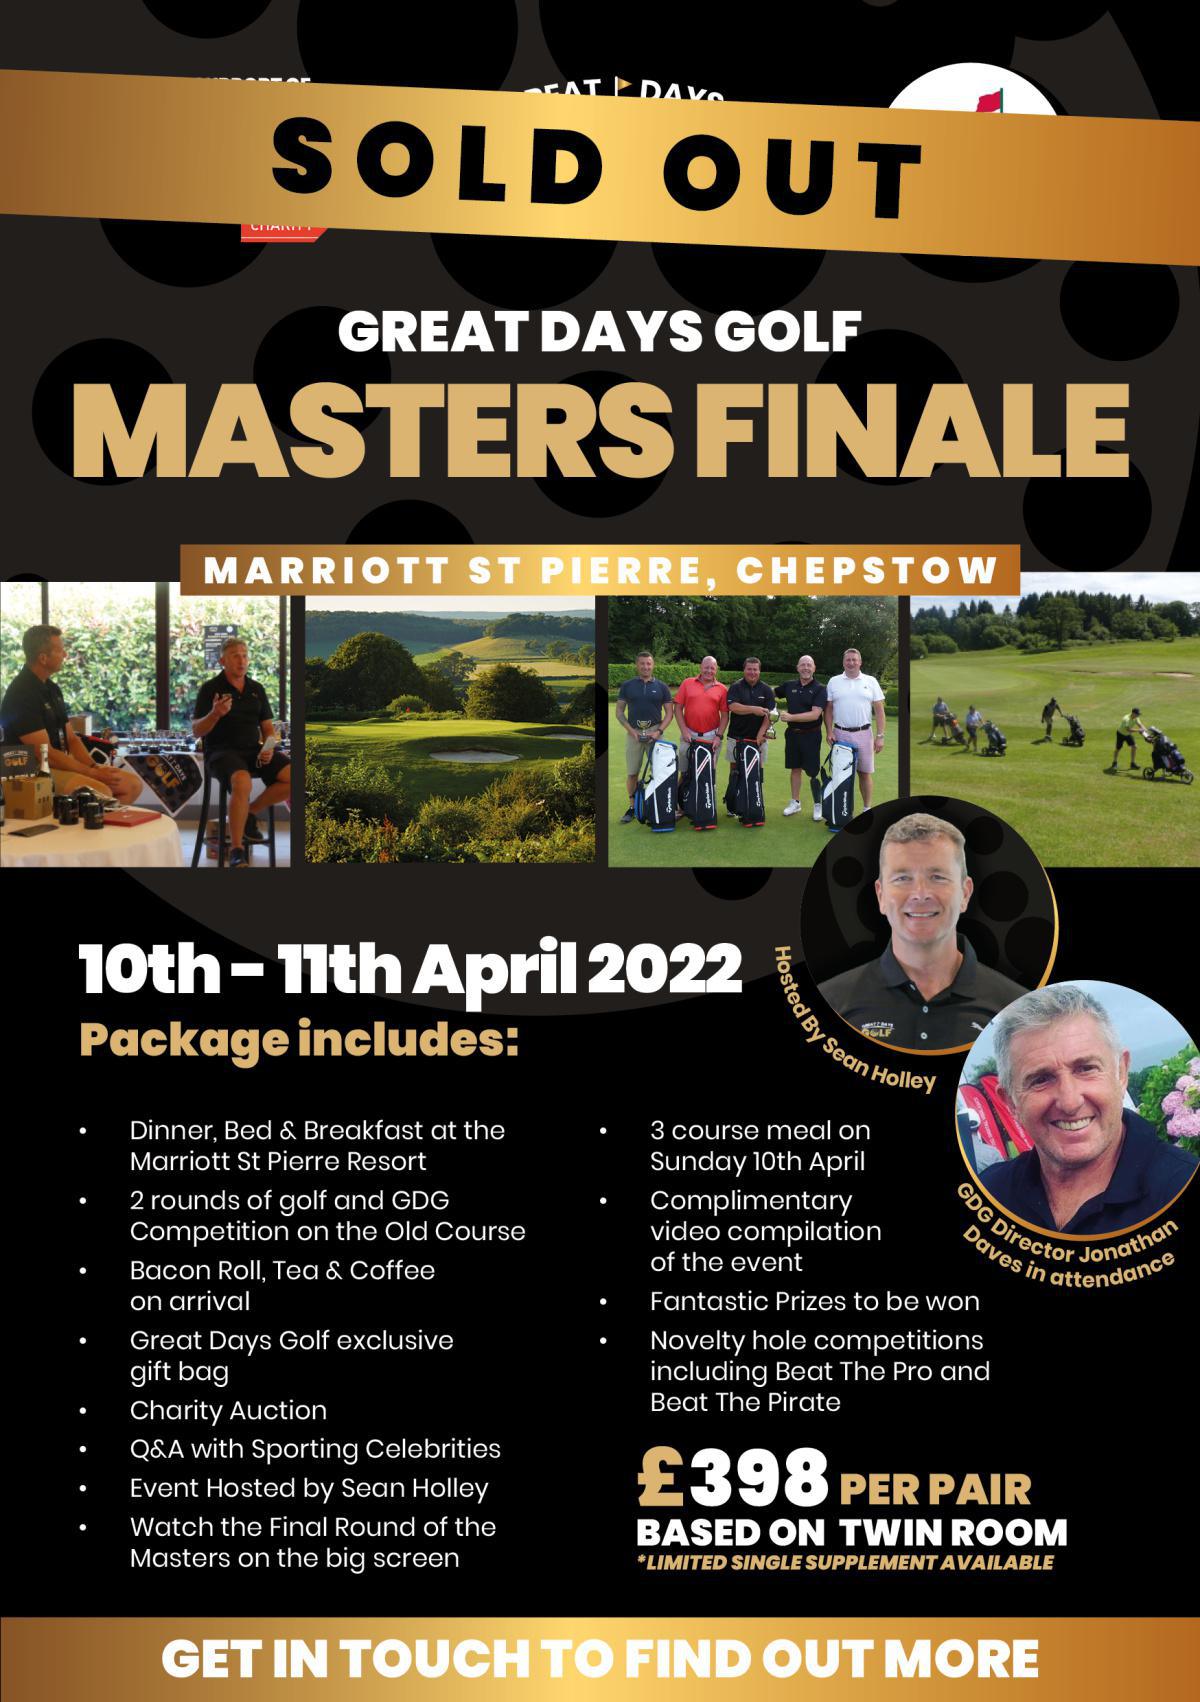 Masters Finale An Overwhelming Success